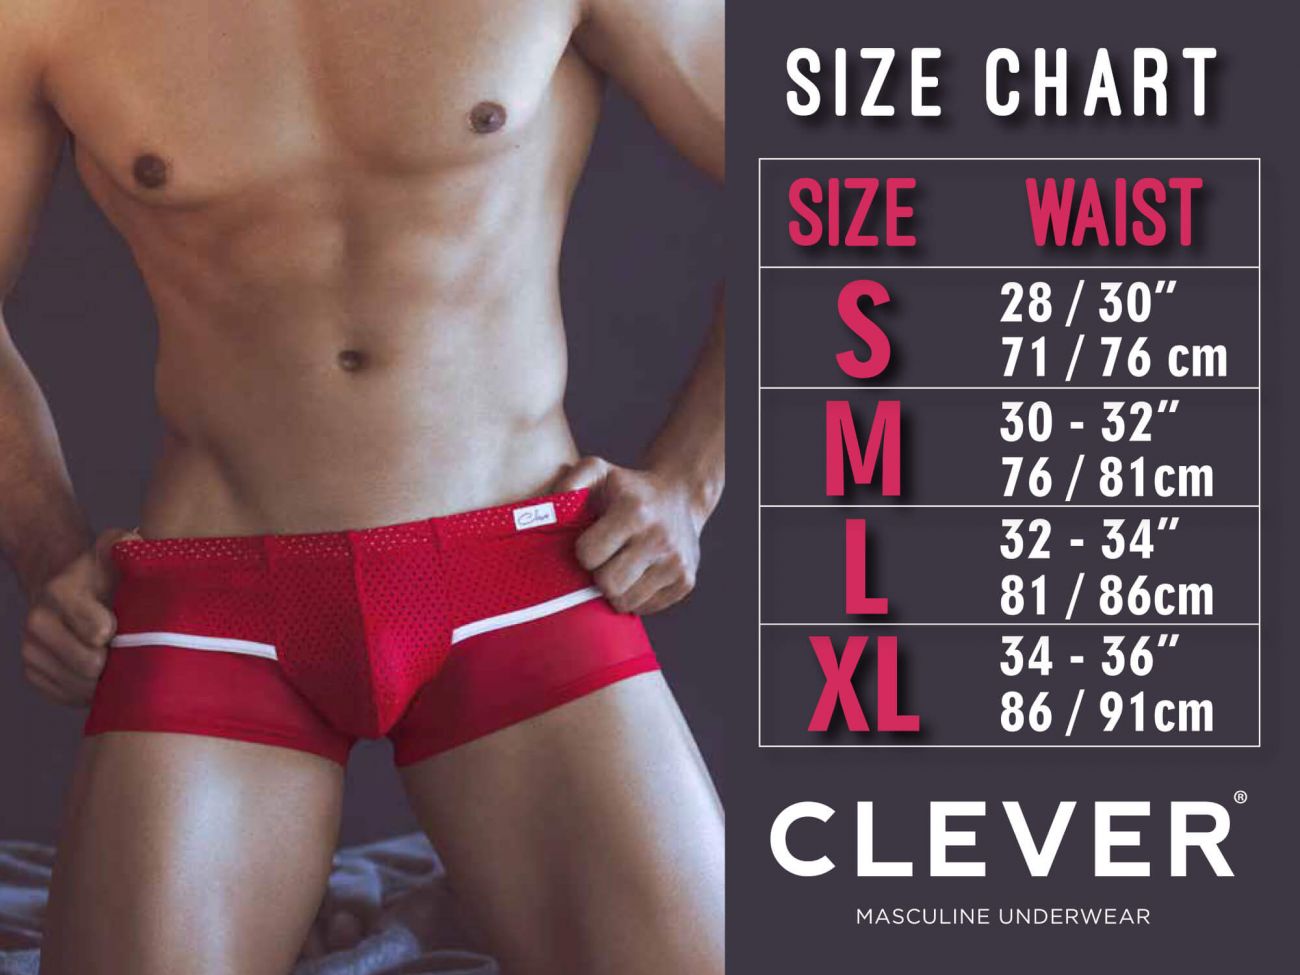 Clever 0372 Ideal Athletic Pants Dark Blue